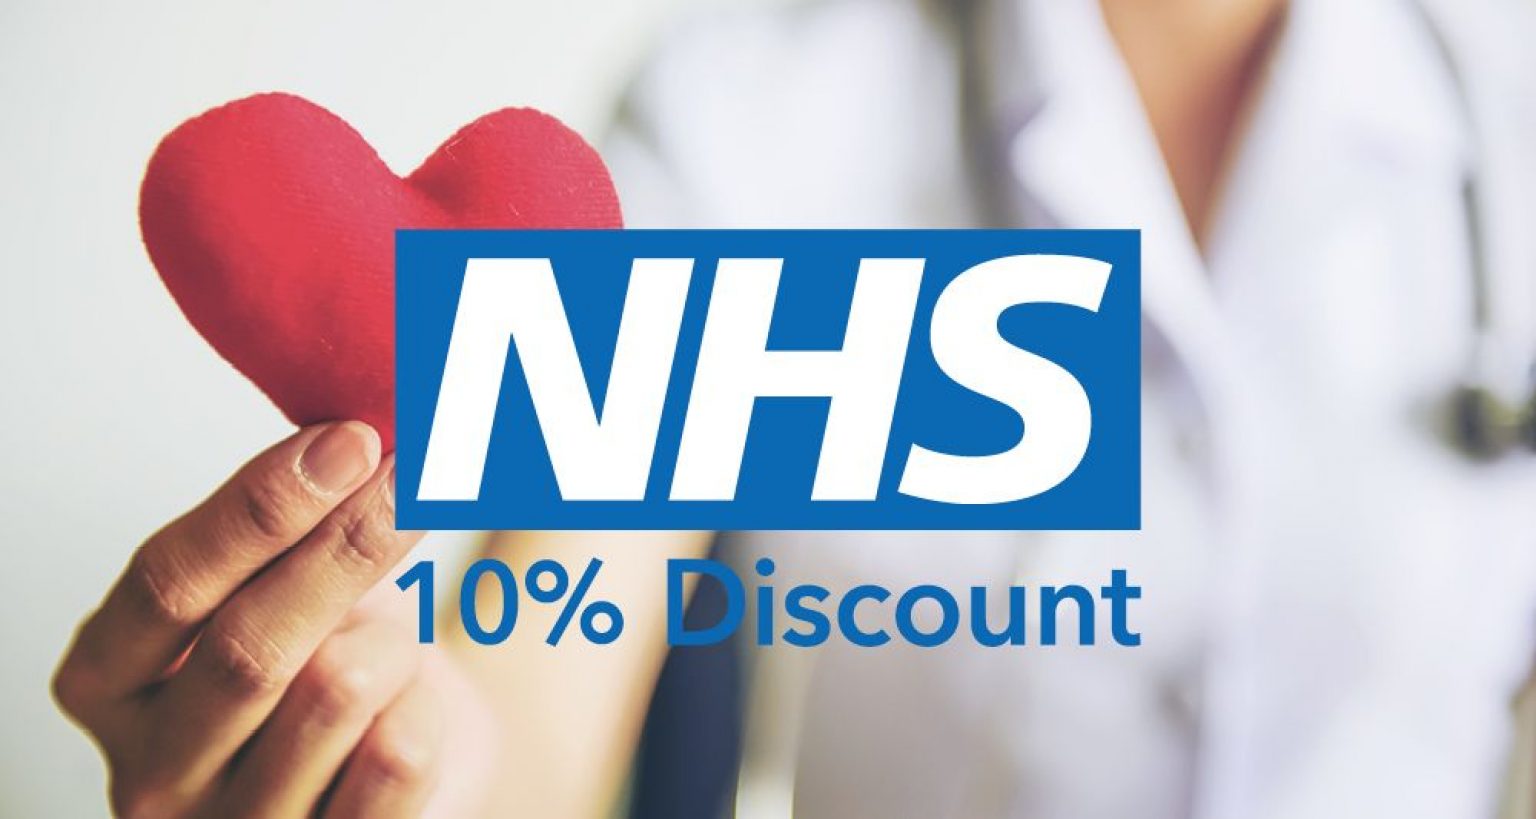 NHS Discounts Offers - wide 7